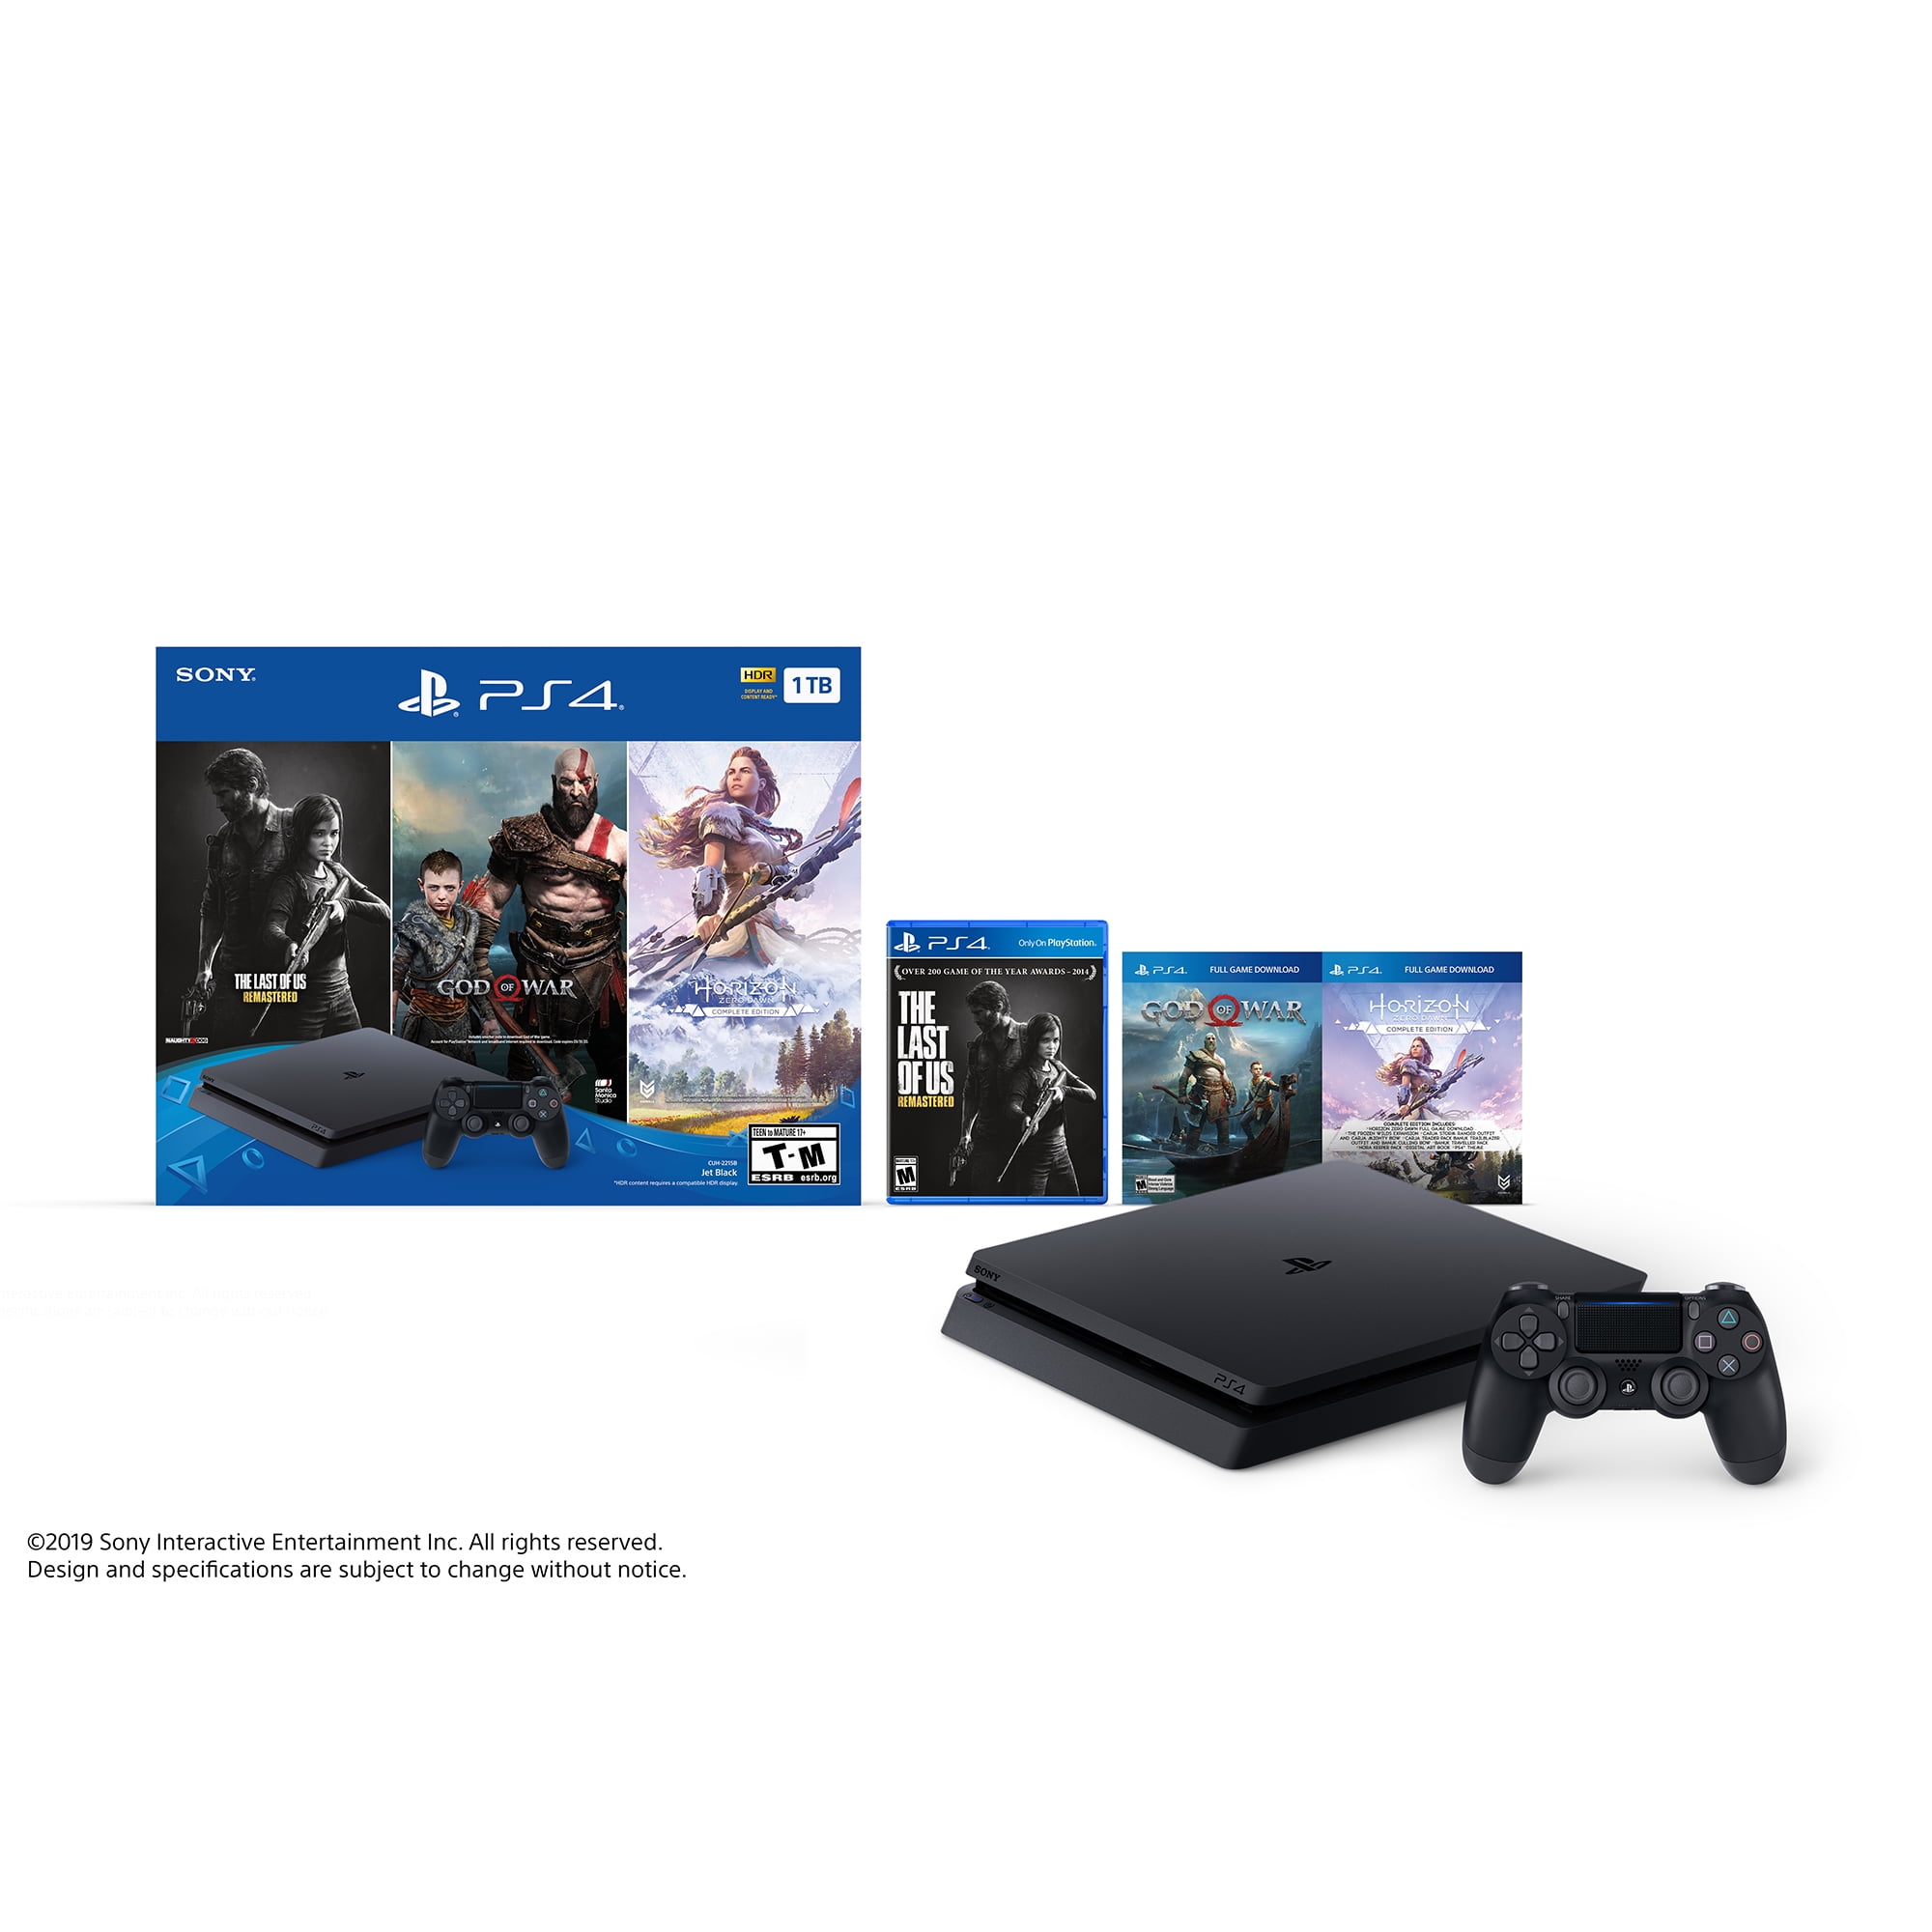 Sony 4 Slim 1TB Only On PlayStation - 3 Games Bundle: God of War, The Last of Us Remastered, and Horizon Zero Dawn: Complete Edition - Walmart.com